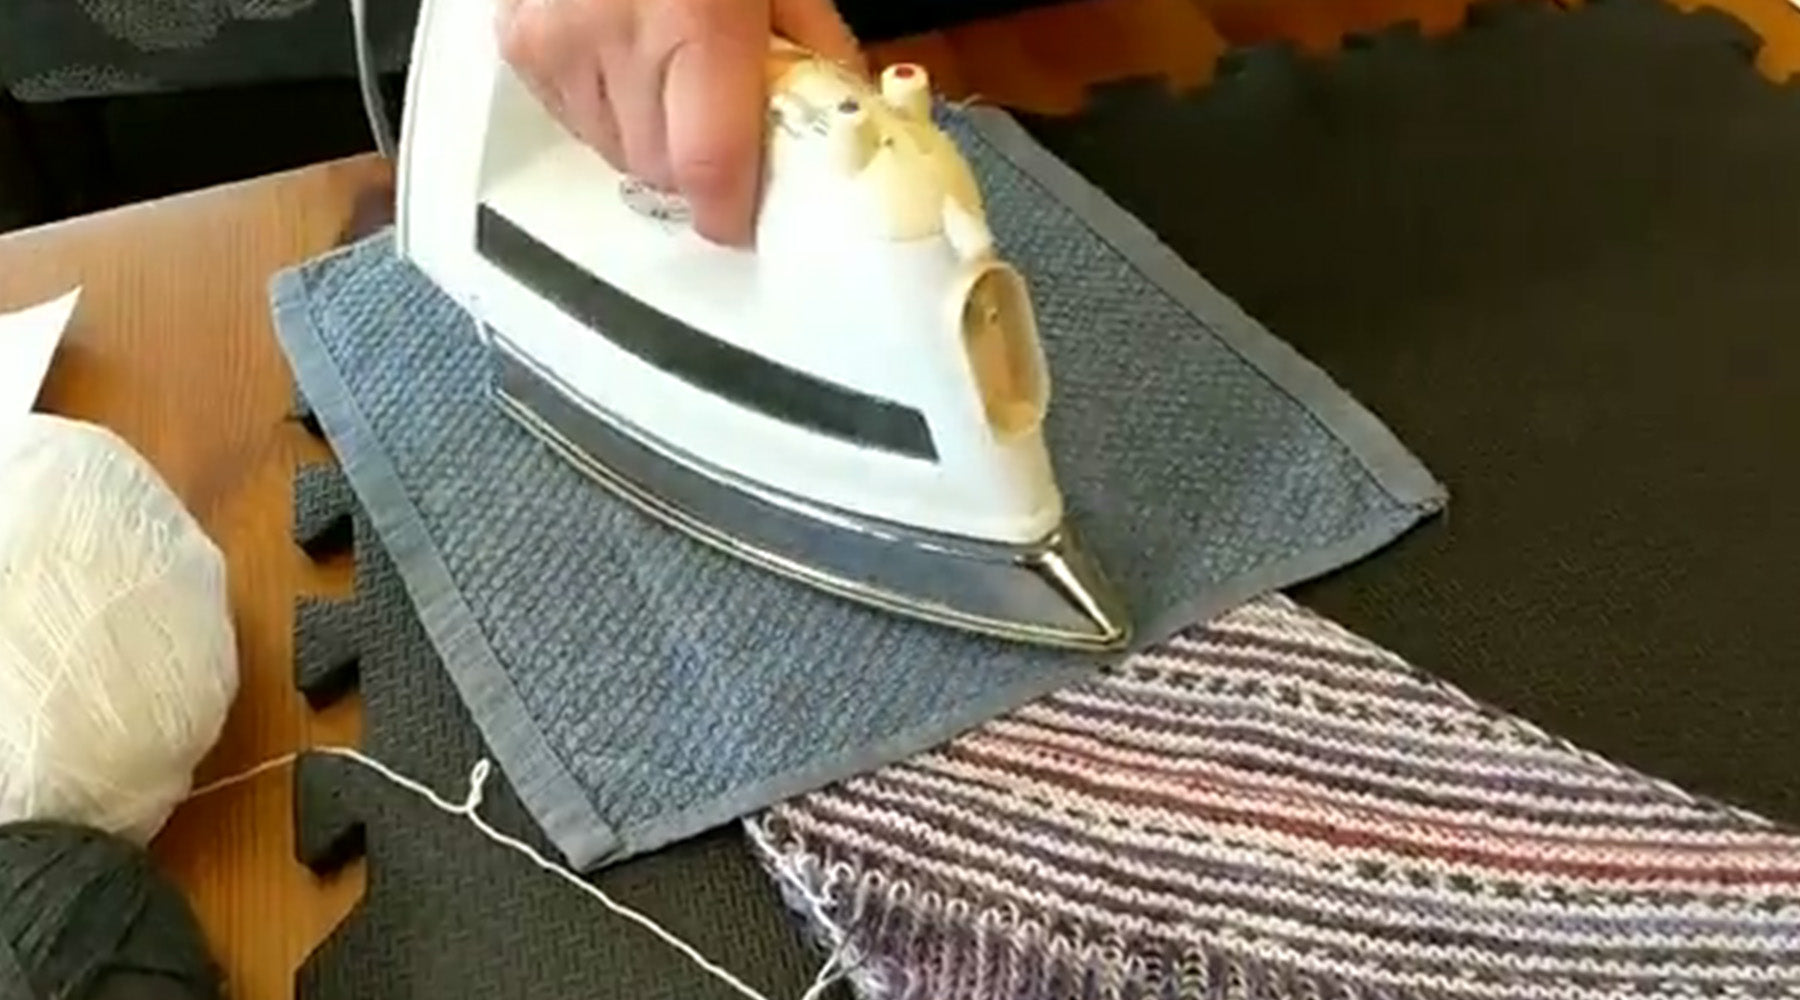 How to Steam Block Acrylic Yarn Without a Steamer